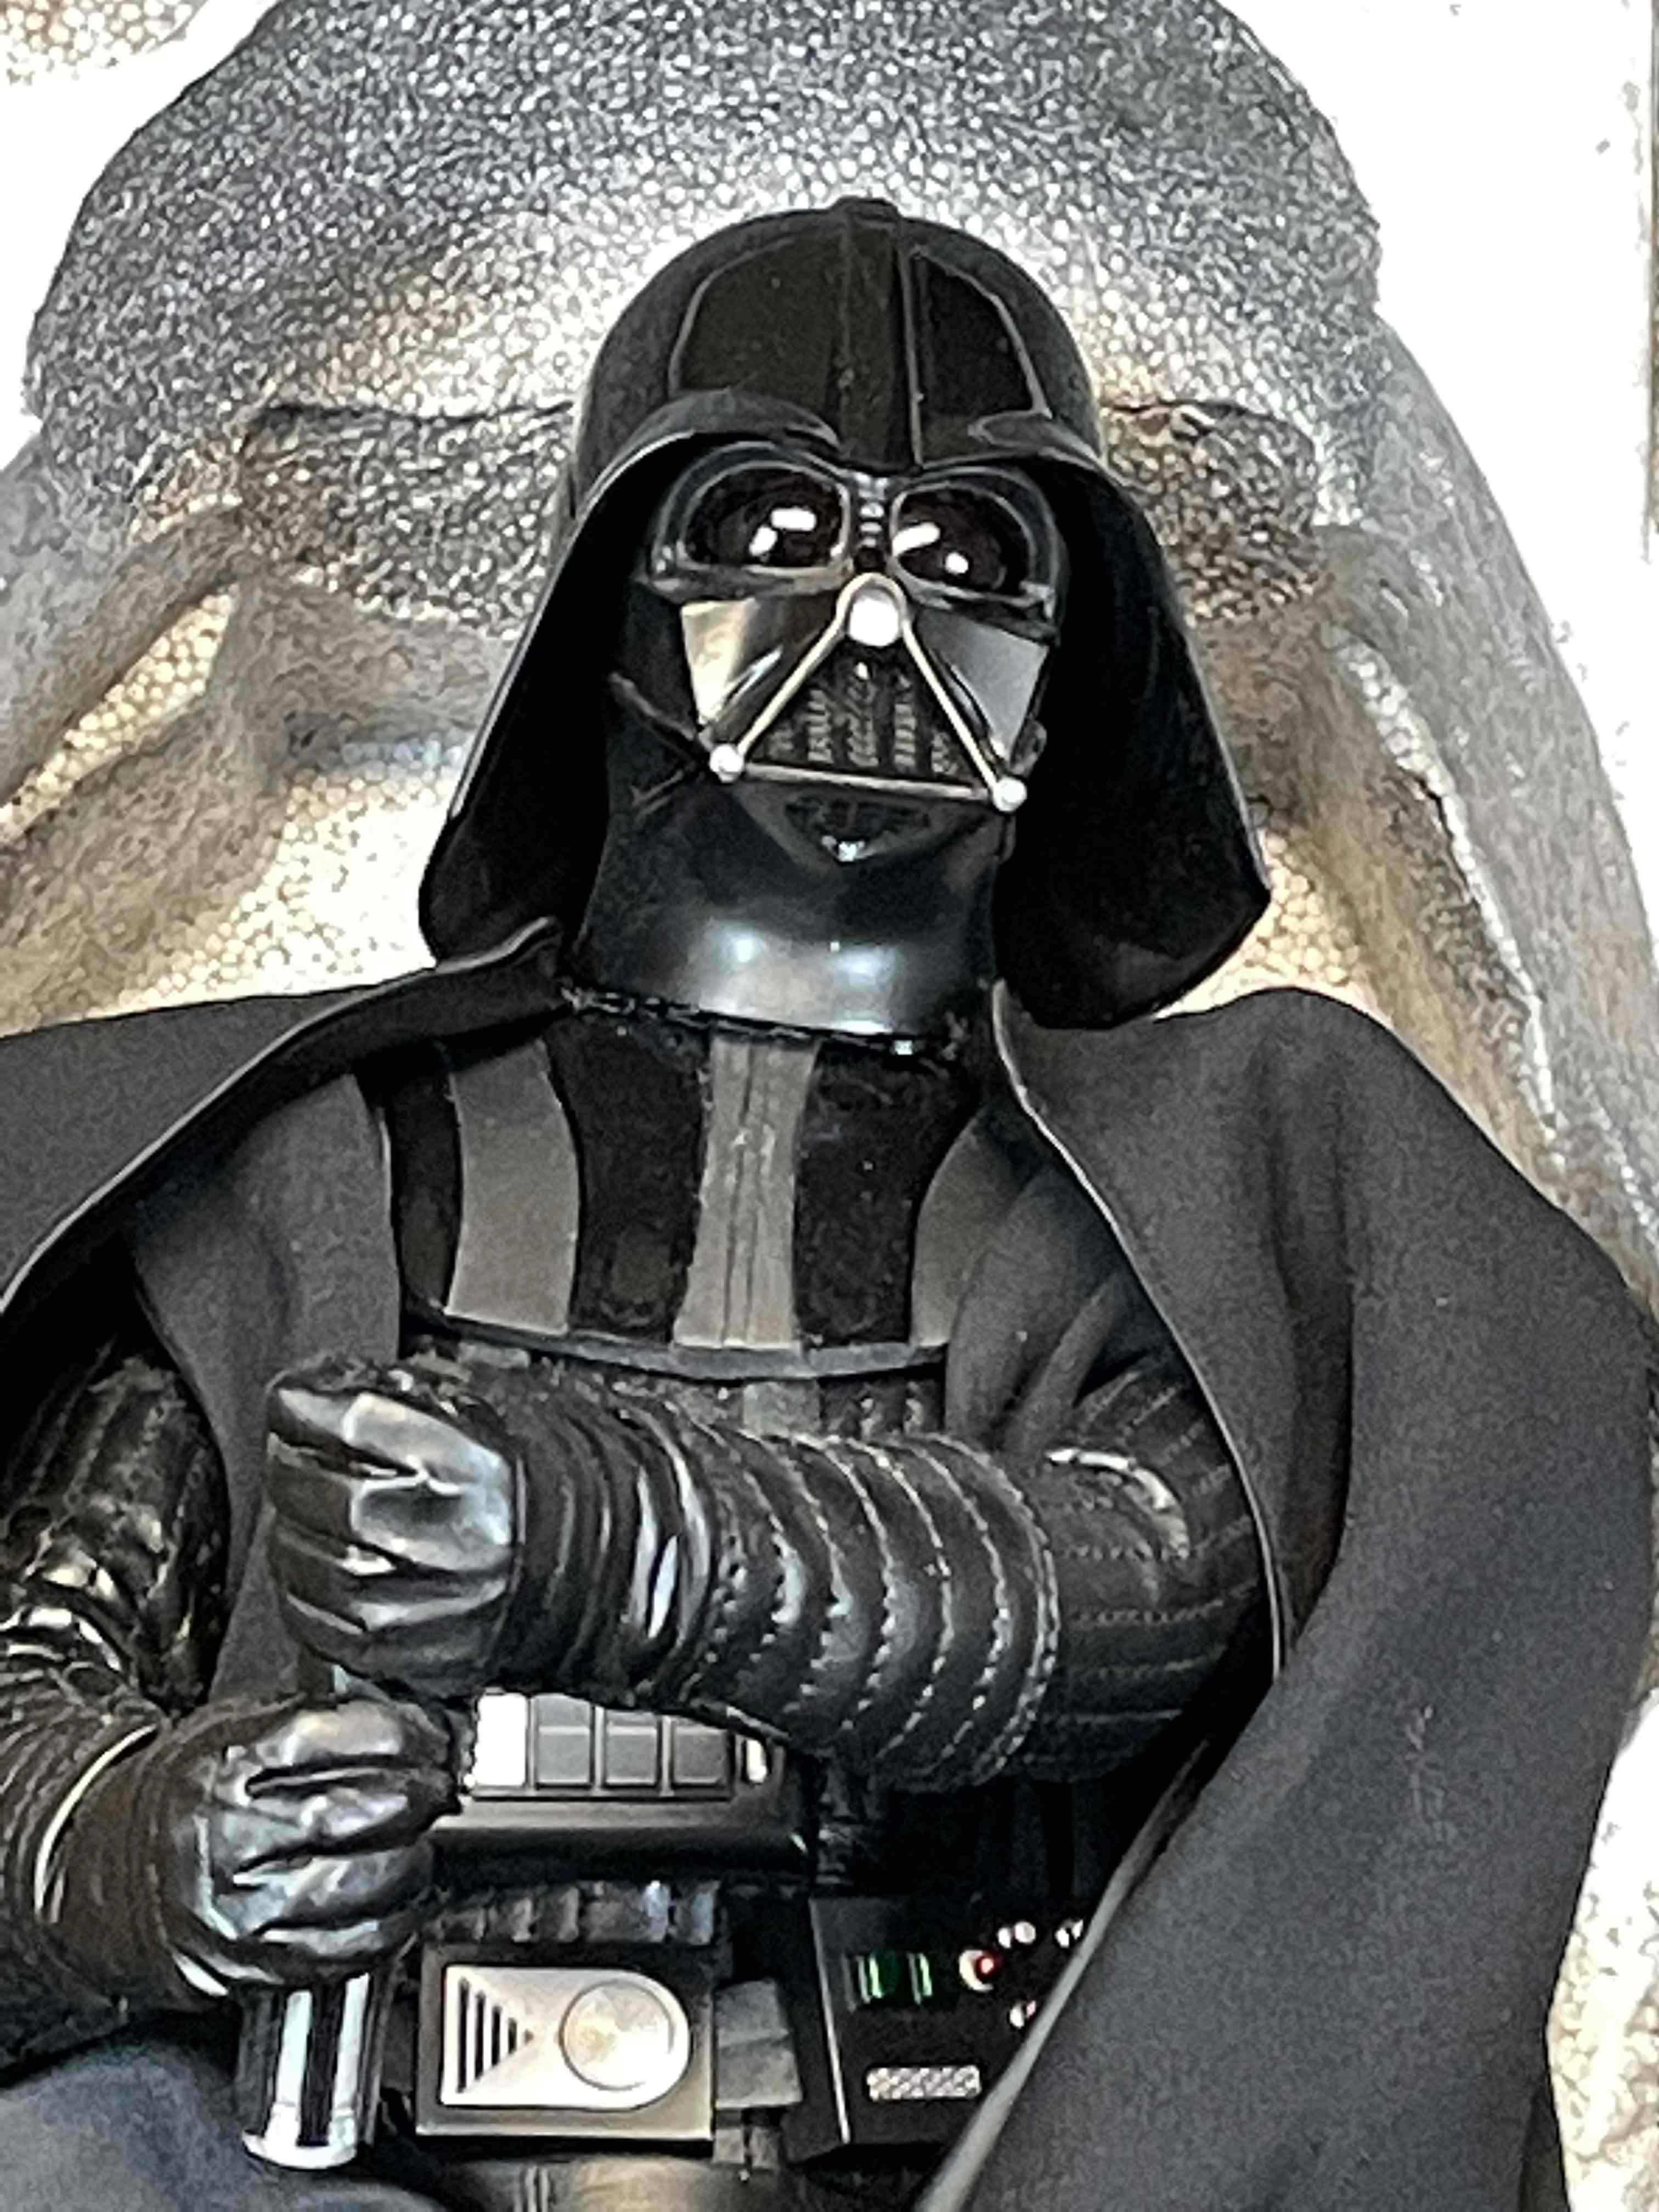 Sideshow STAR WARS Electronic Darth Vader 1/4 Scale Premium Format Figure Exclusive Ver 1594/2000